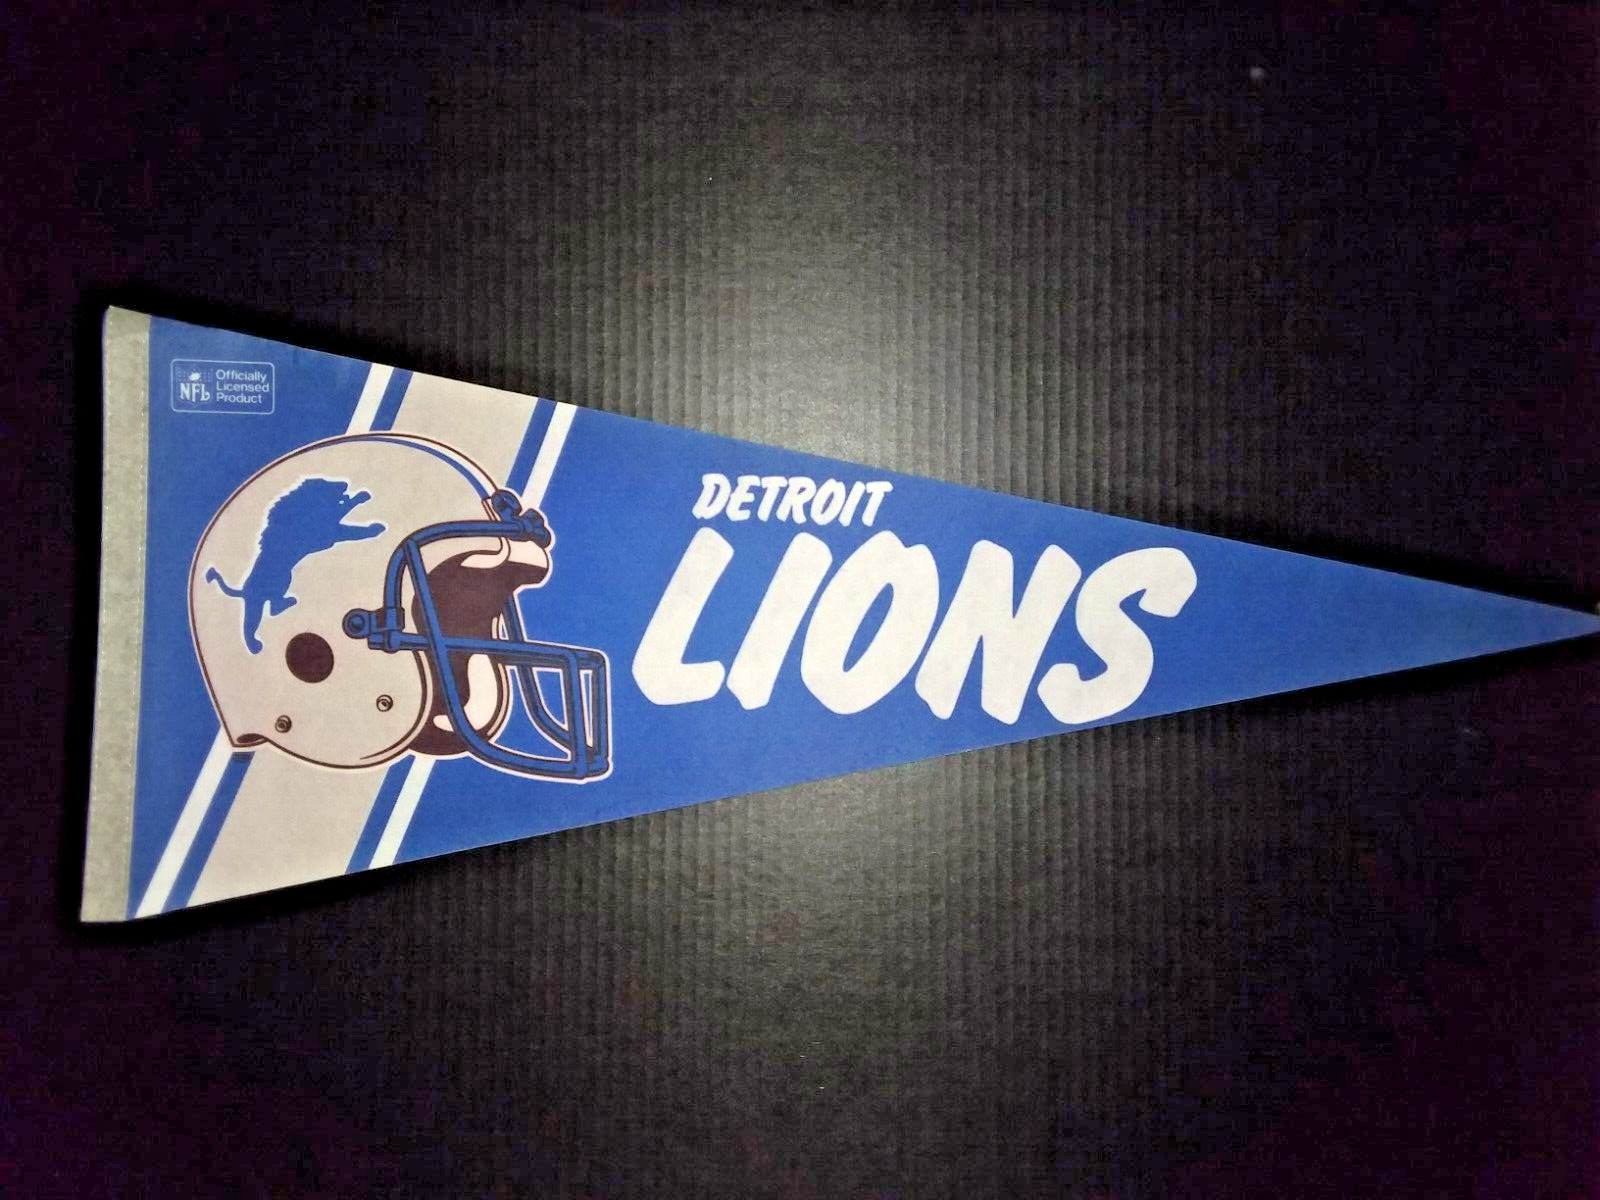 DETROIT LIONS Full Sized 12X30 Football TEAM Pennant *FREE SHIPPING*